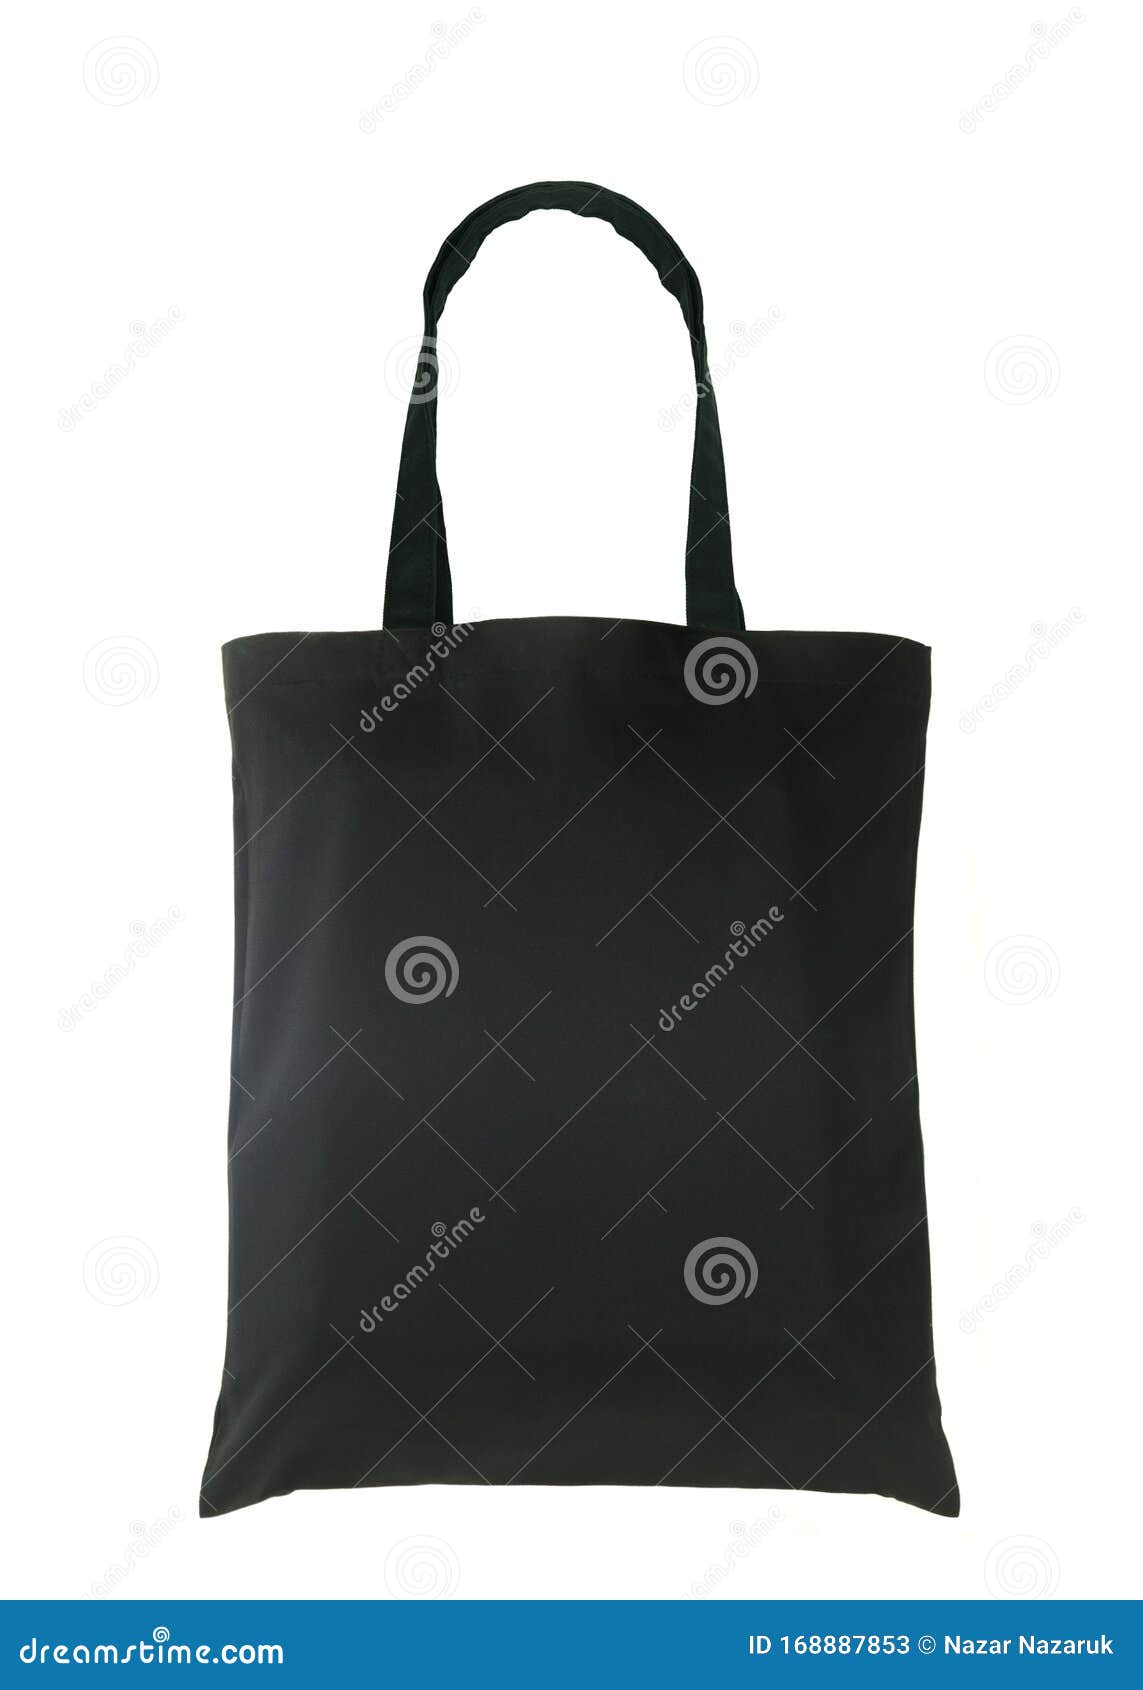 Black Tote Bag on White Backgroung Stock Image - Image of carry, object ...